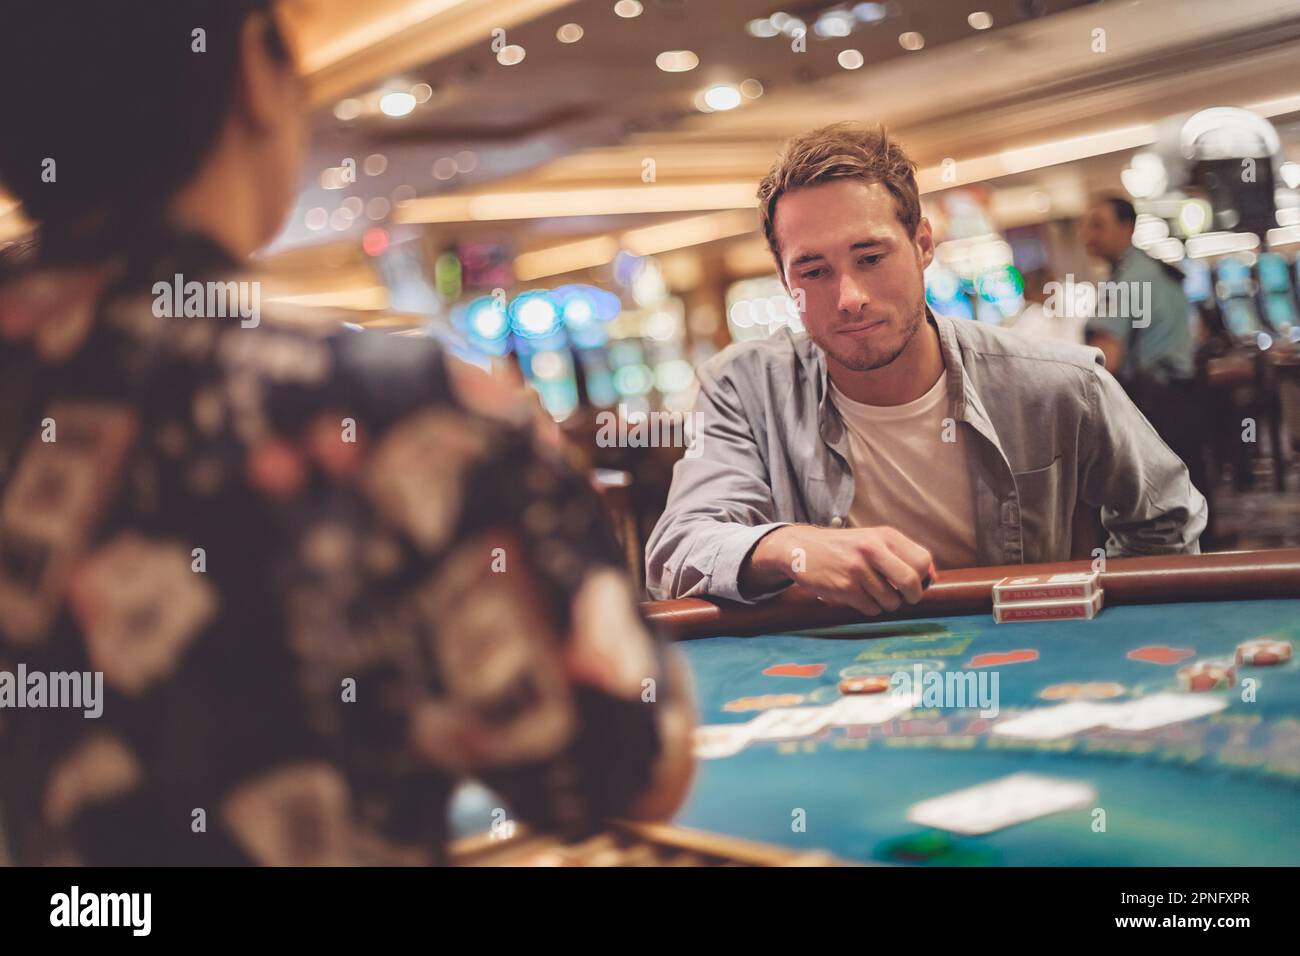 Casino gambling young man playing blackjack at table with cards and chips. Indoor portrait of gambler with dealer Stock Photo